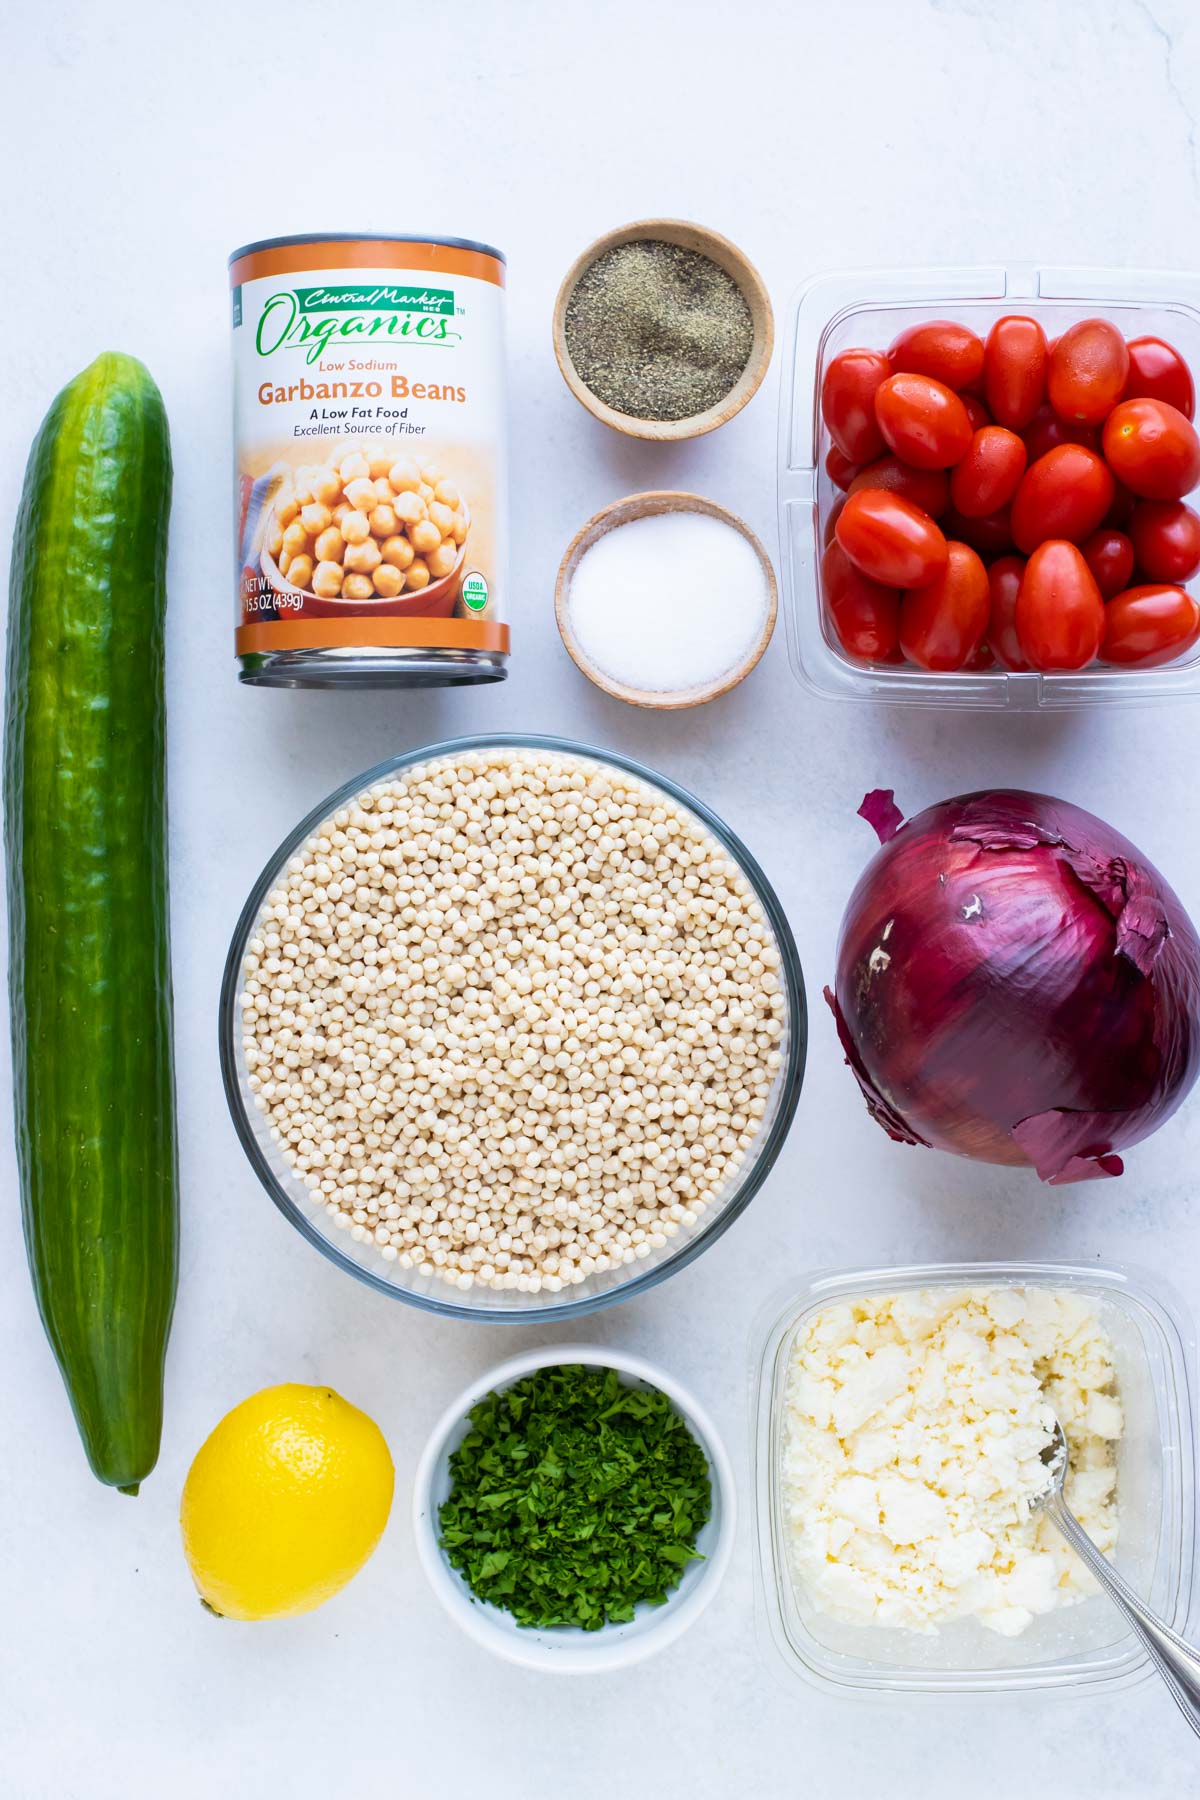 Cucumber, garbanzo beans, couscous, tomatoes, onion, feta, parsley, and lemon as ingredients for a recipe.